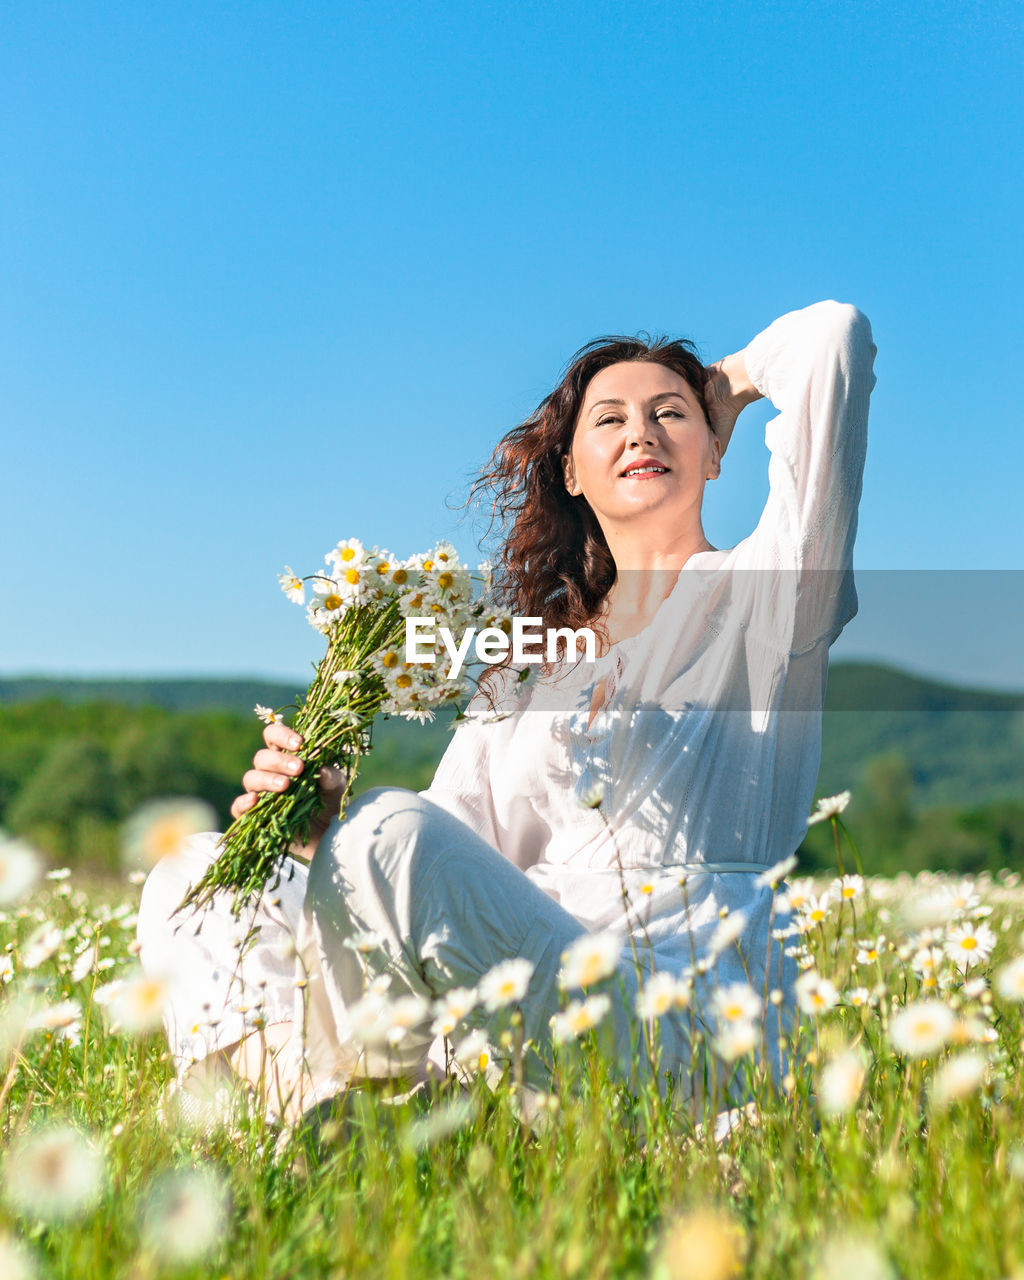 A happy woman in a spacious summer dress poses on a blooming field of daisies on a clear summer day